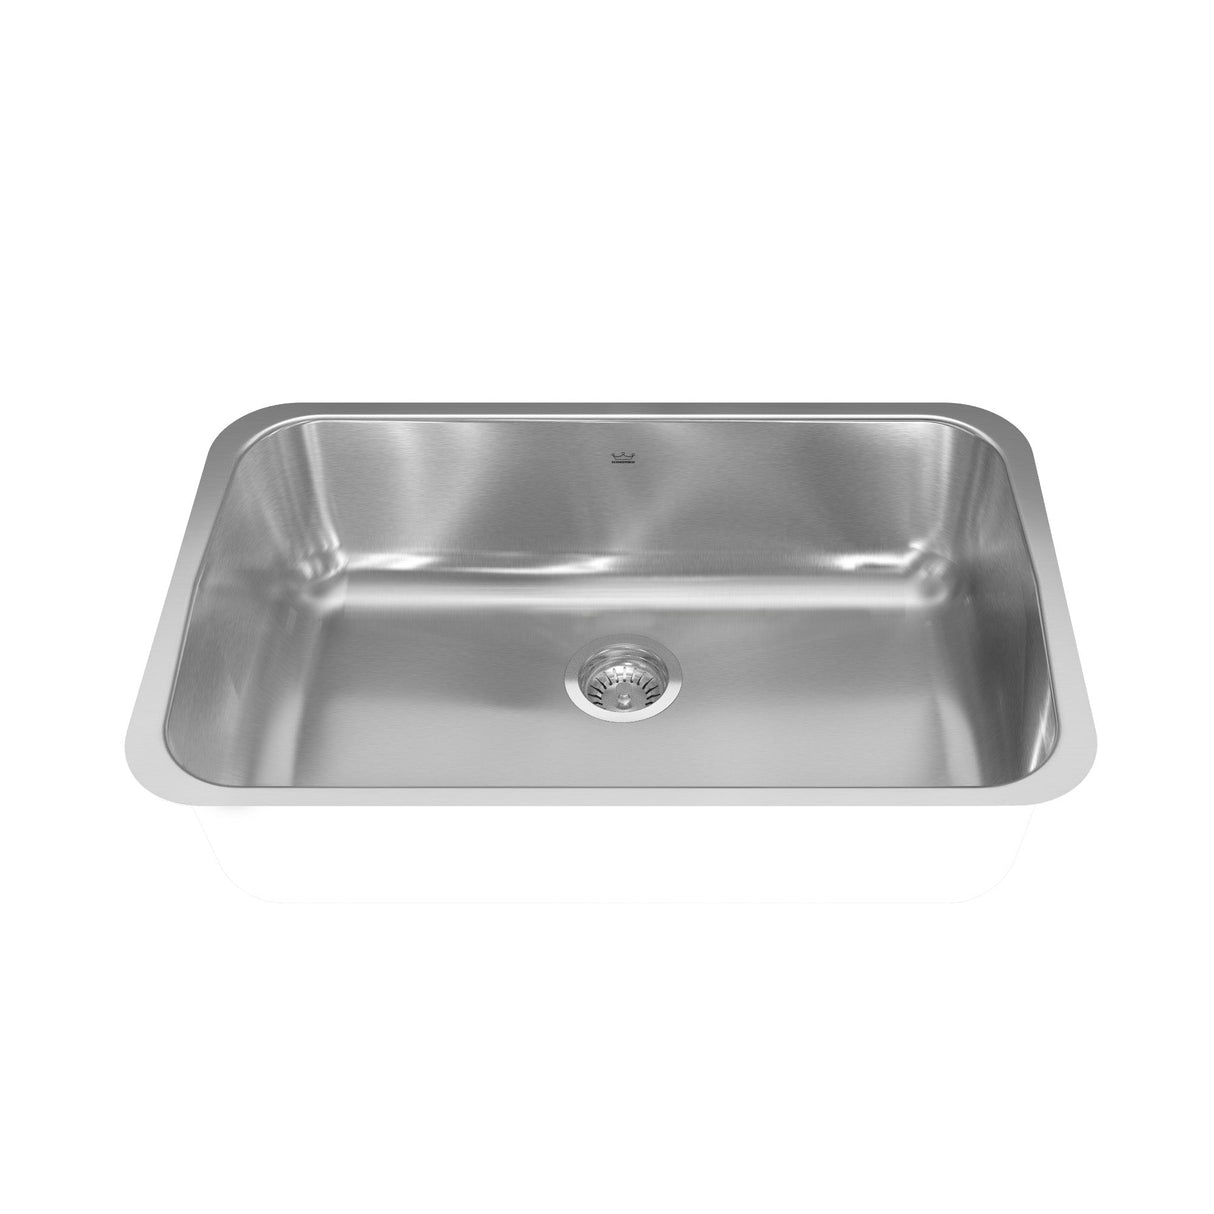 KINDRED NS1930U-9N Reginox 29.75-in LR x 18.75-in FB x 8.5-in DP Undermount Single Bowl Stainless Steel Kitchen Sink In Linear brushed Bowl with Silk Finished Rim